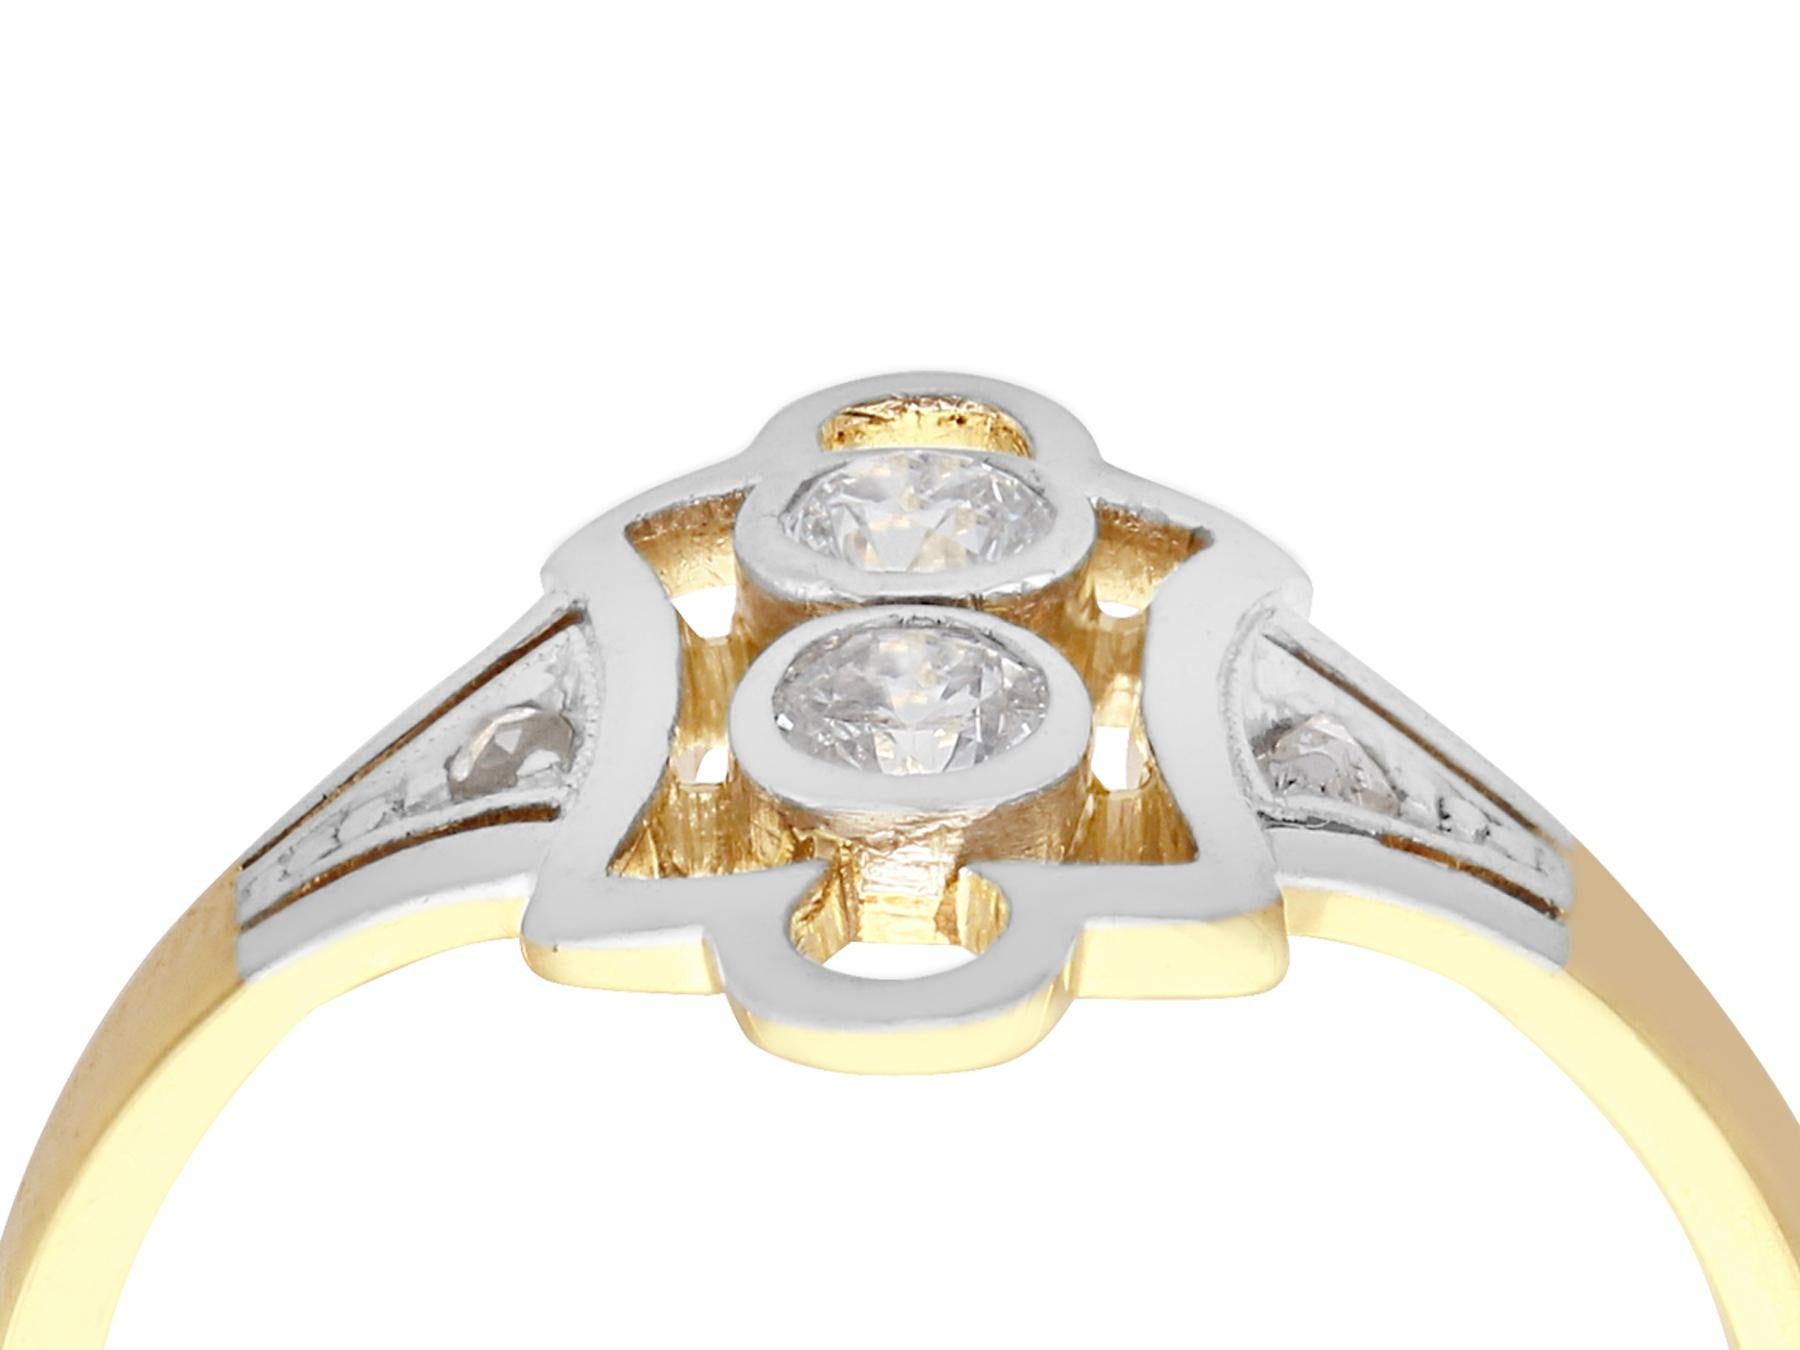 An impressive European 0.21 carat diamond and 14 karat yellow gold, 14 karat white gold set cocktail ring; part of our diverse antique jewelry and estate jewelry collections.

This fine and impressive European diamond ring has been crafted in 14k